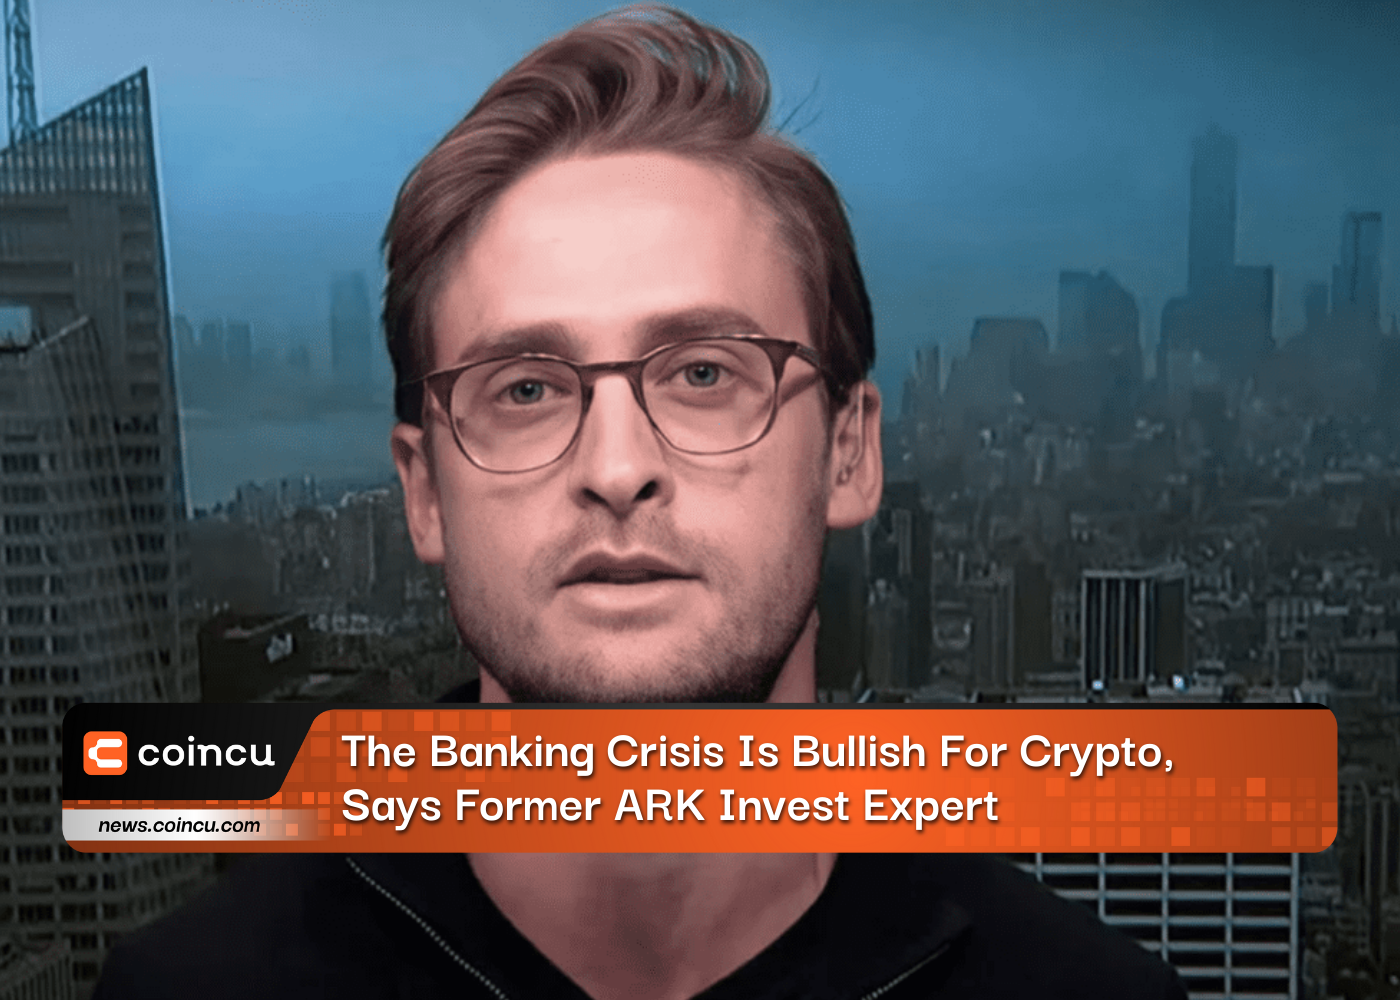 The Banking Crisis Is Bullish For Crypto, Says Former ARK Invest Expert